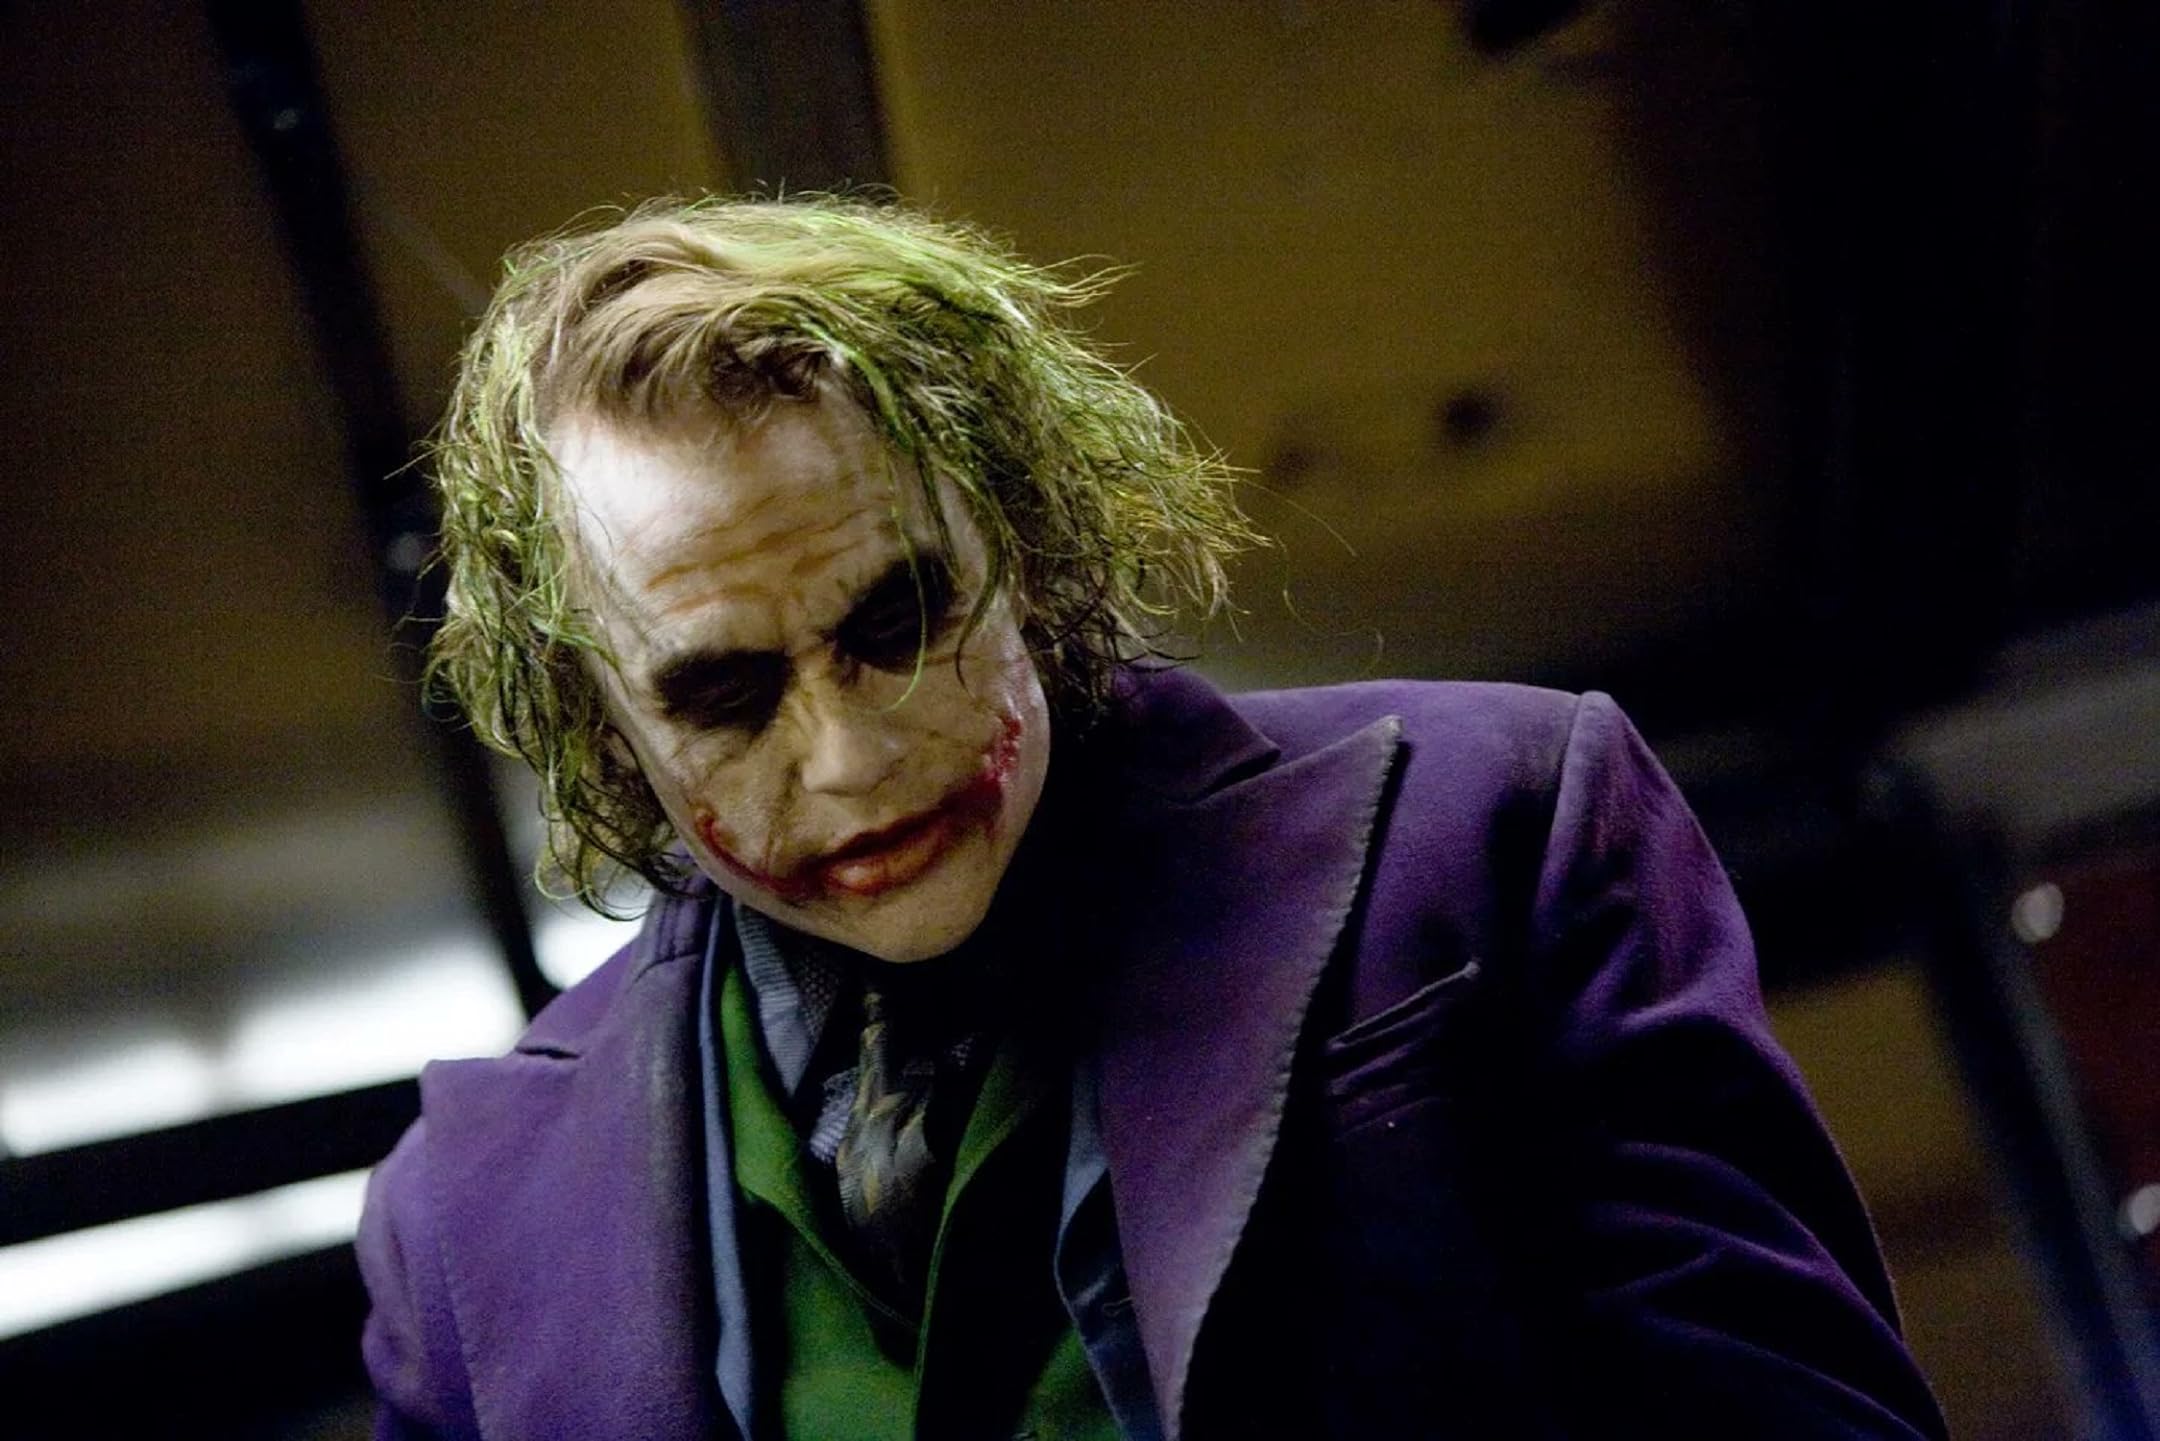 The Joker's iconic costume takes on the Halloween color pairing of violet and green